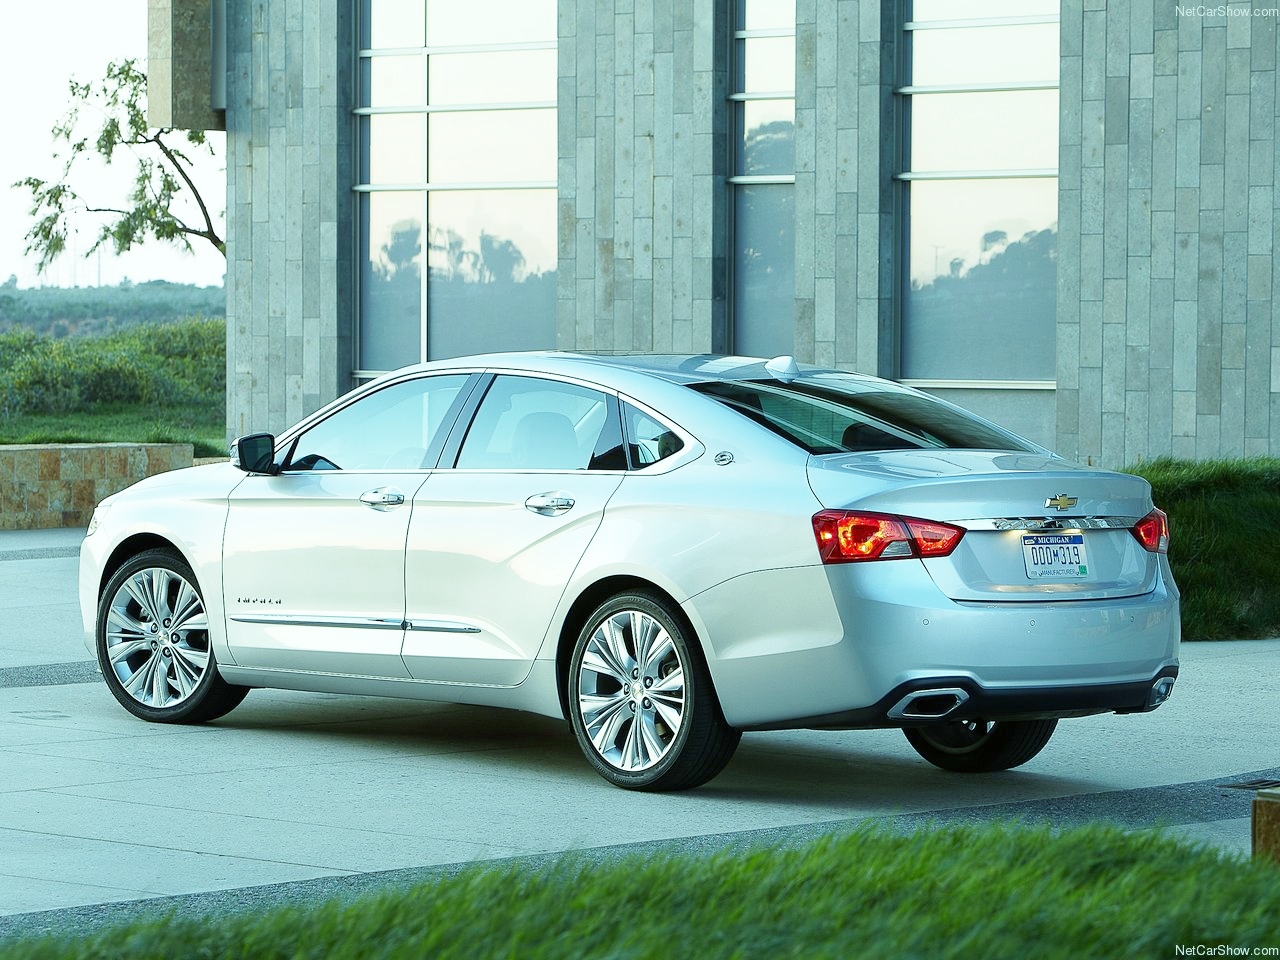 Automobiles & Architecture Observations: New Chevrolet Impala